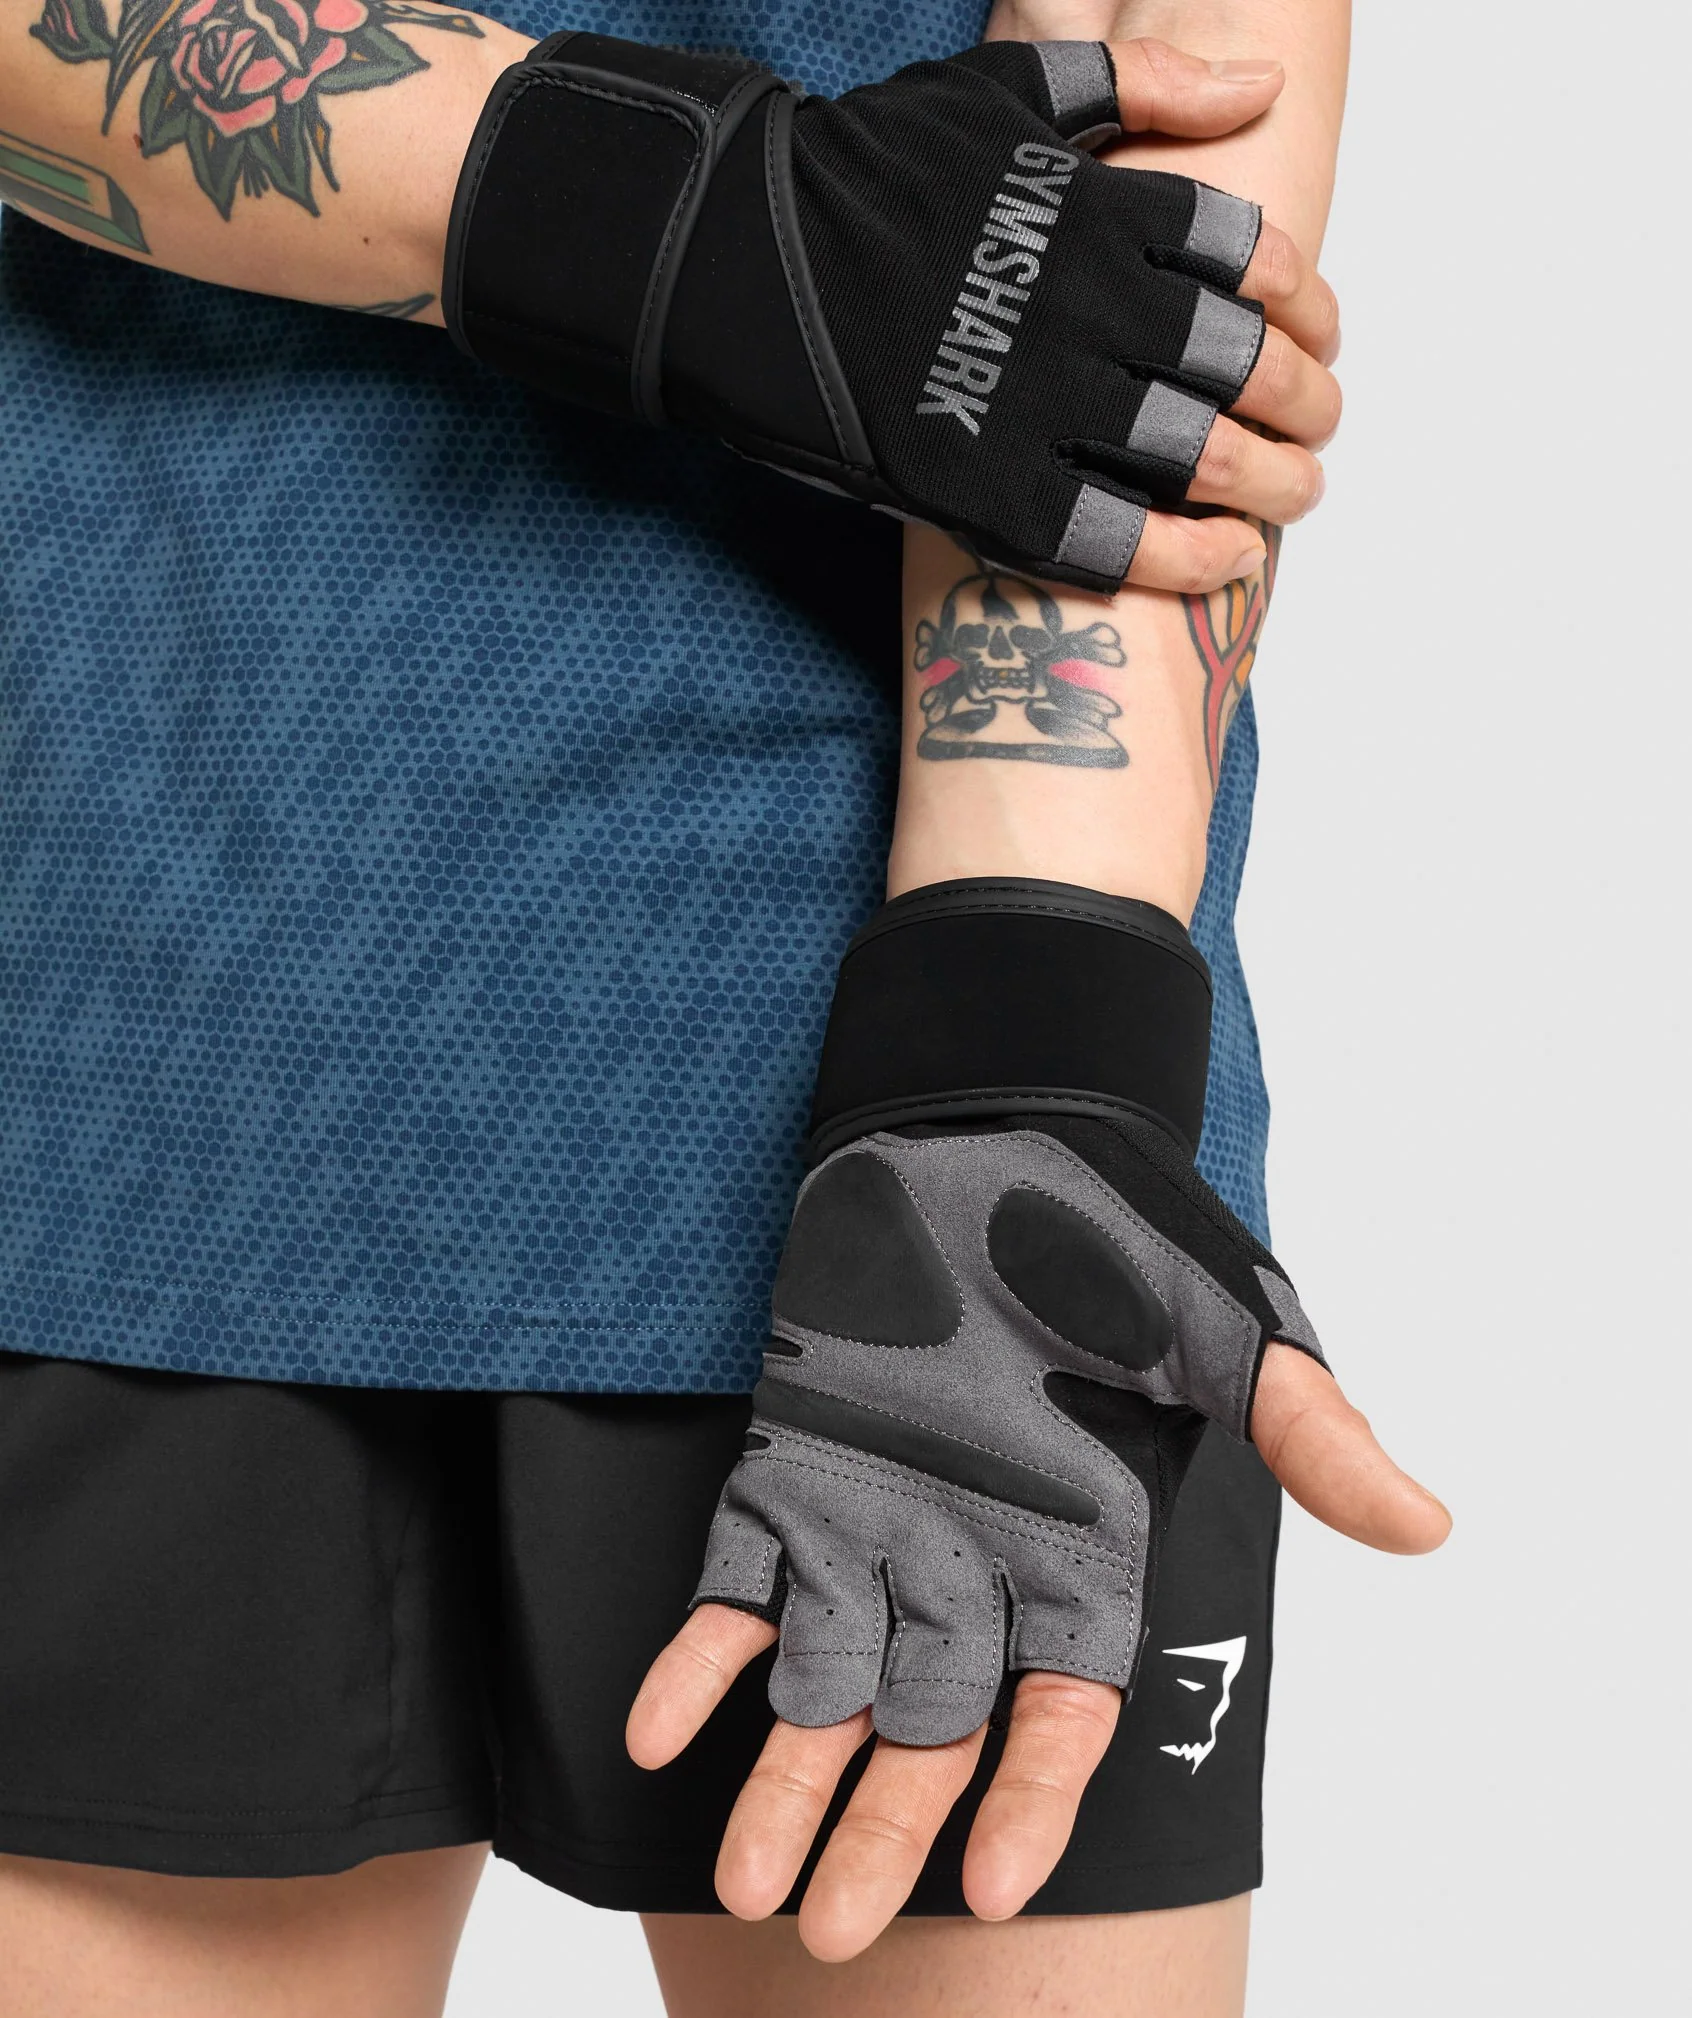 WRAP LIFTING GLOVES